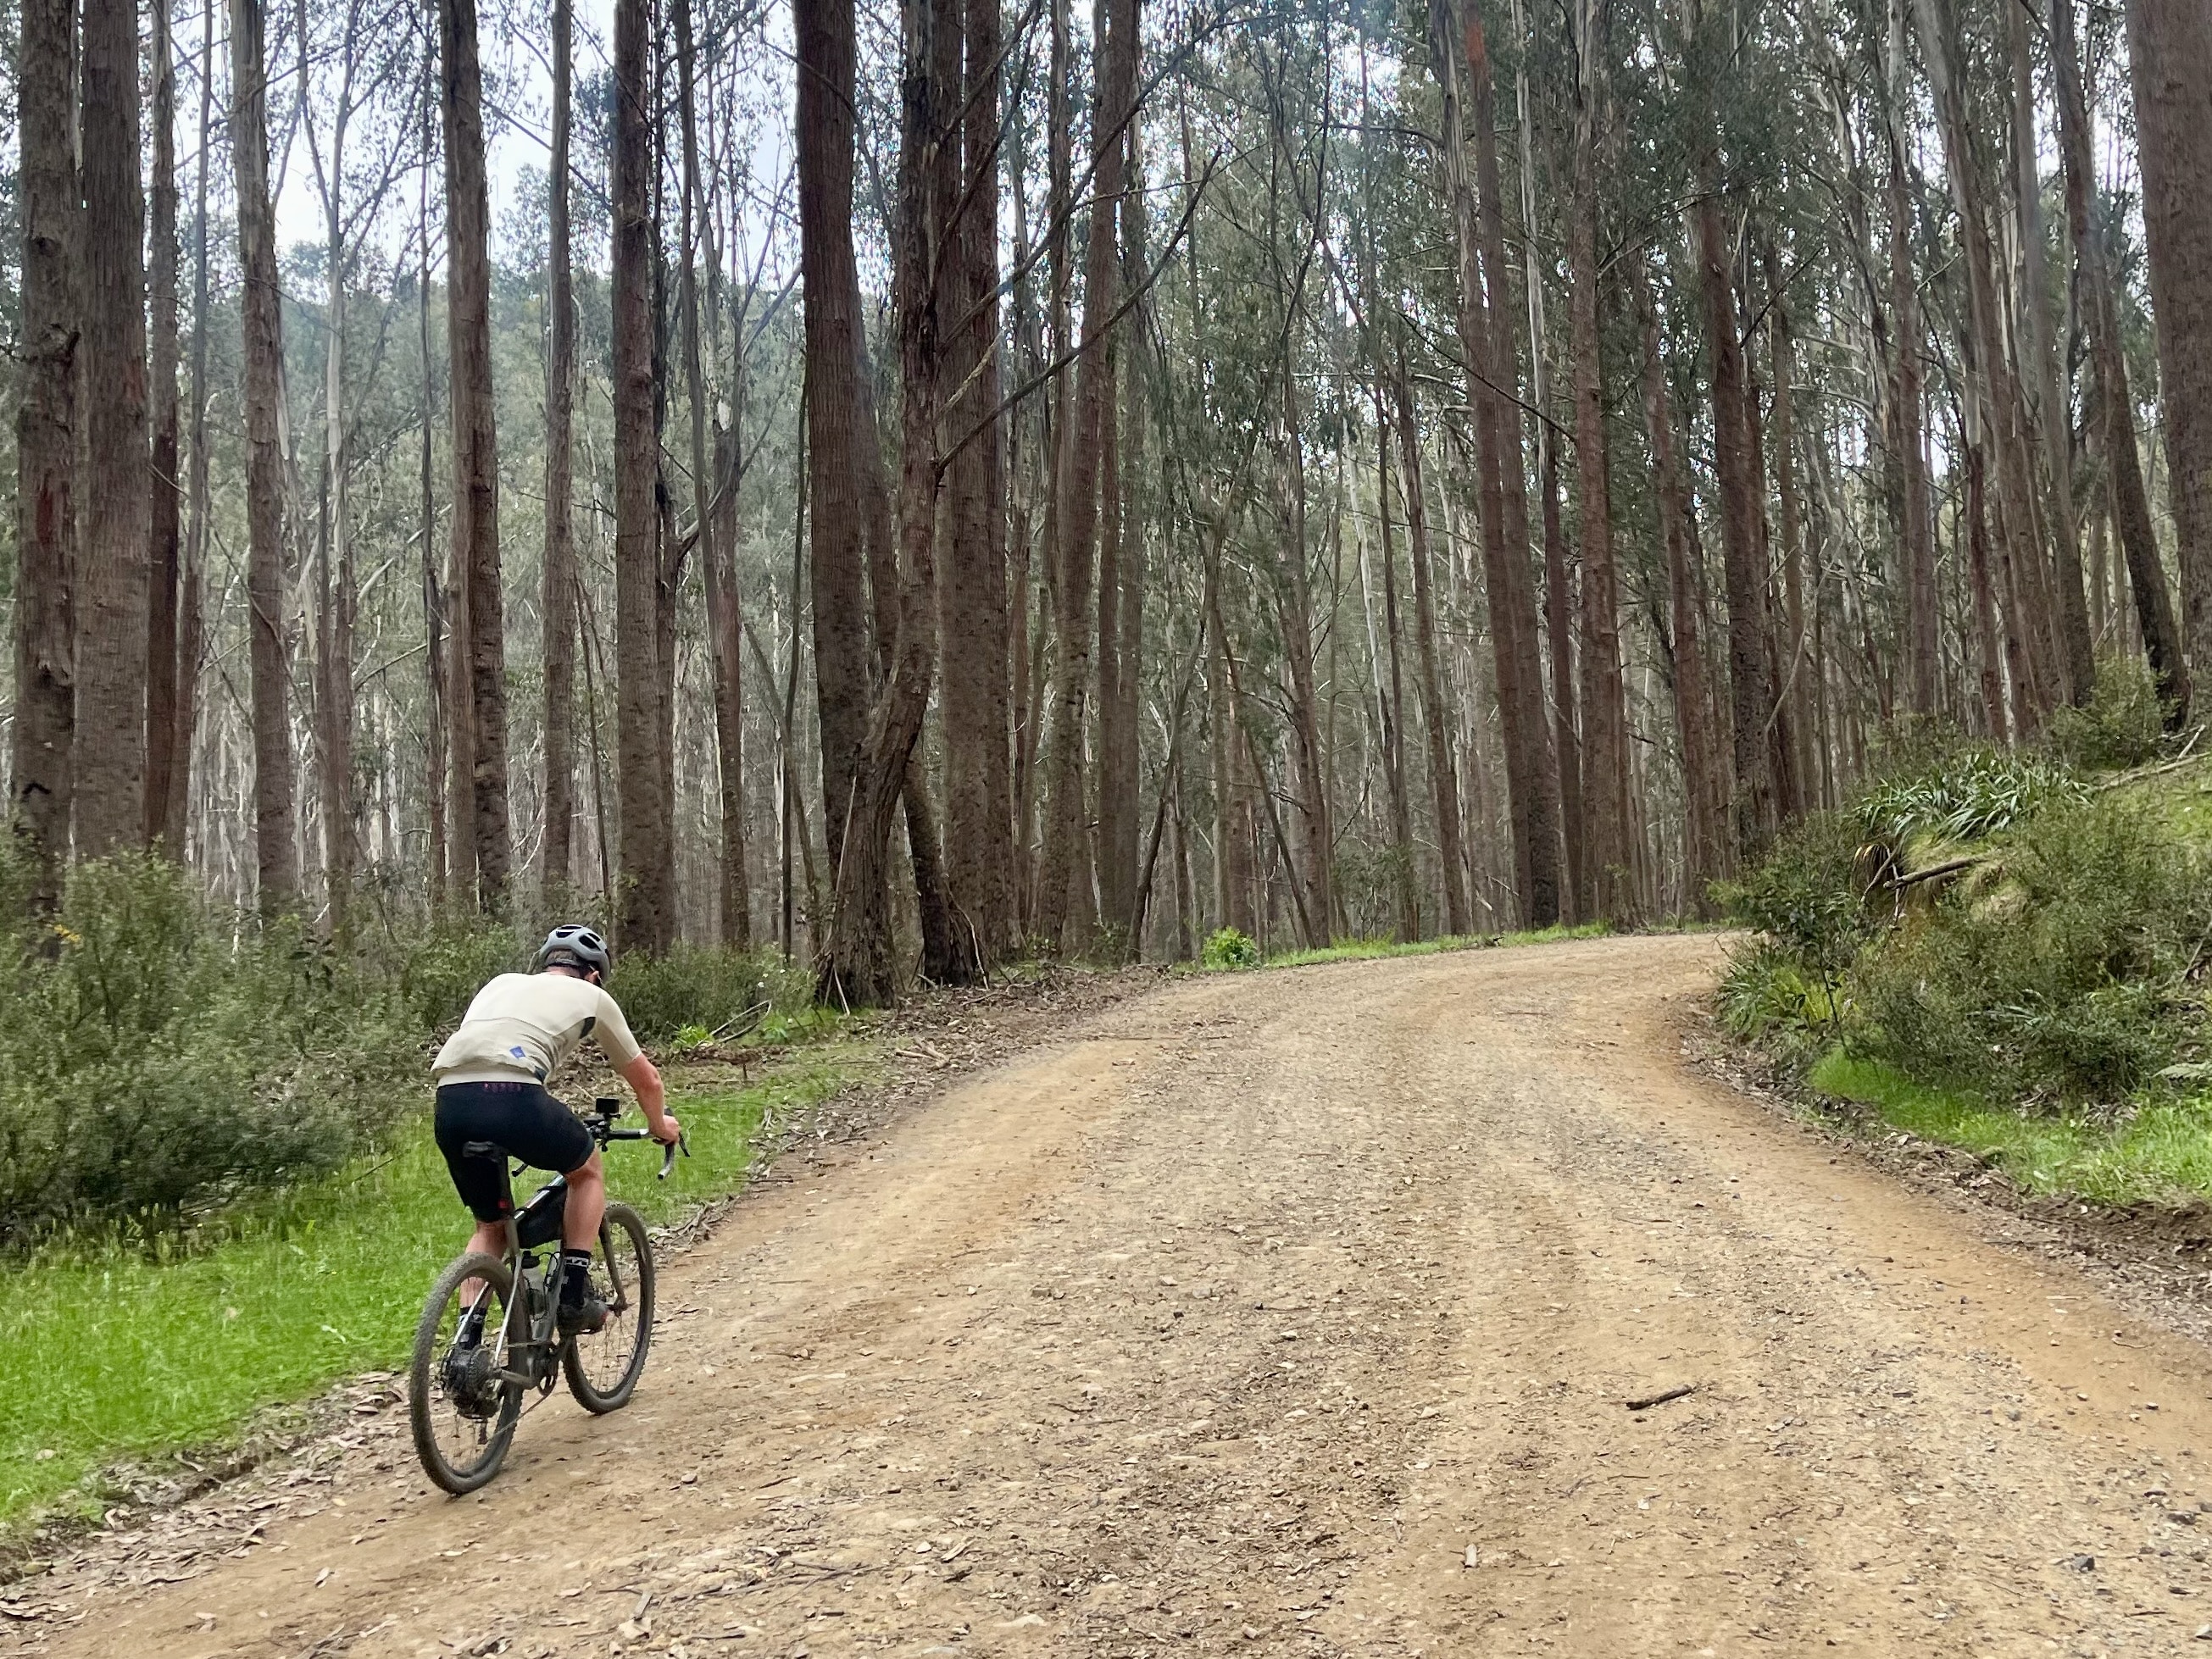 Cyclist climbing uo a gradual gravel road surrounded by tall native trees